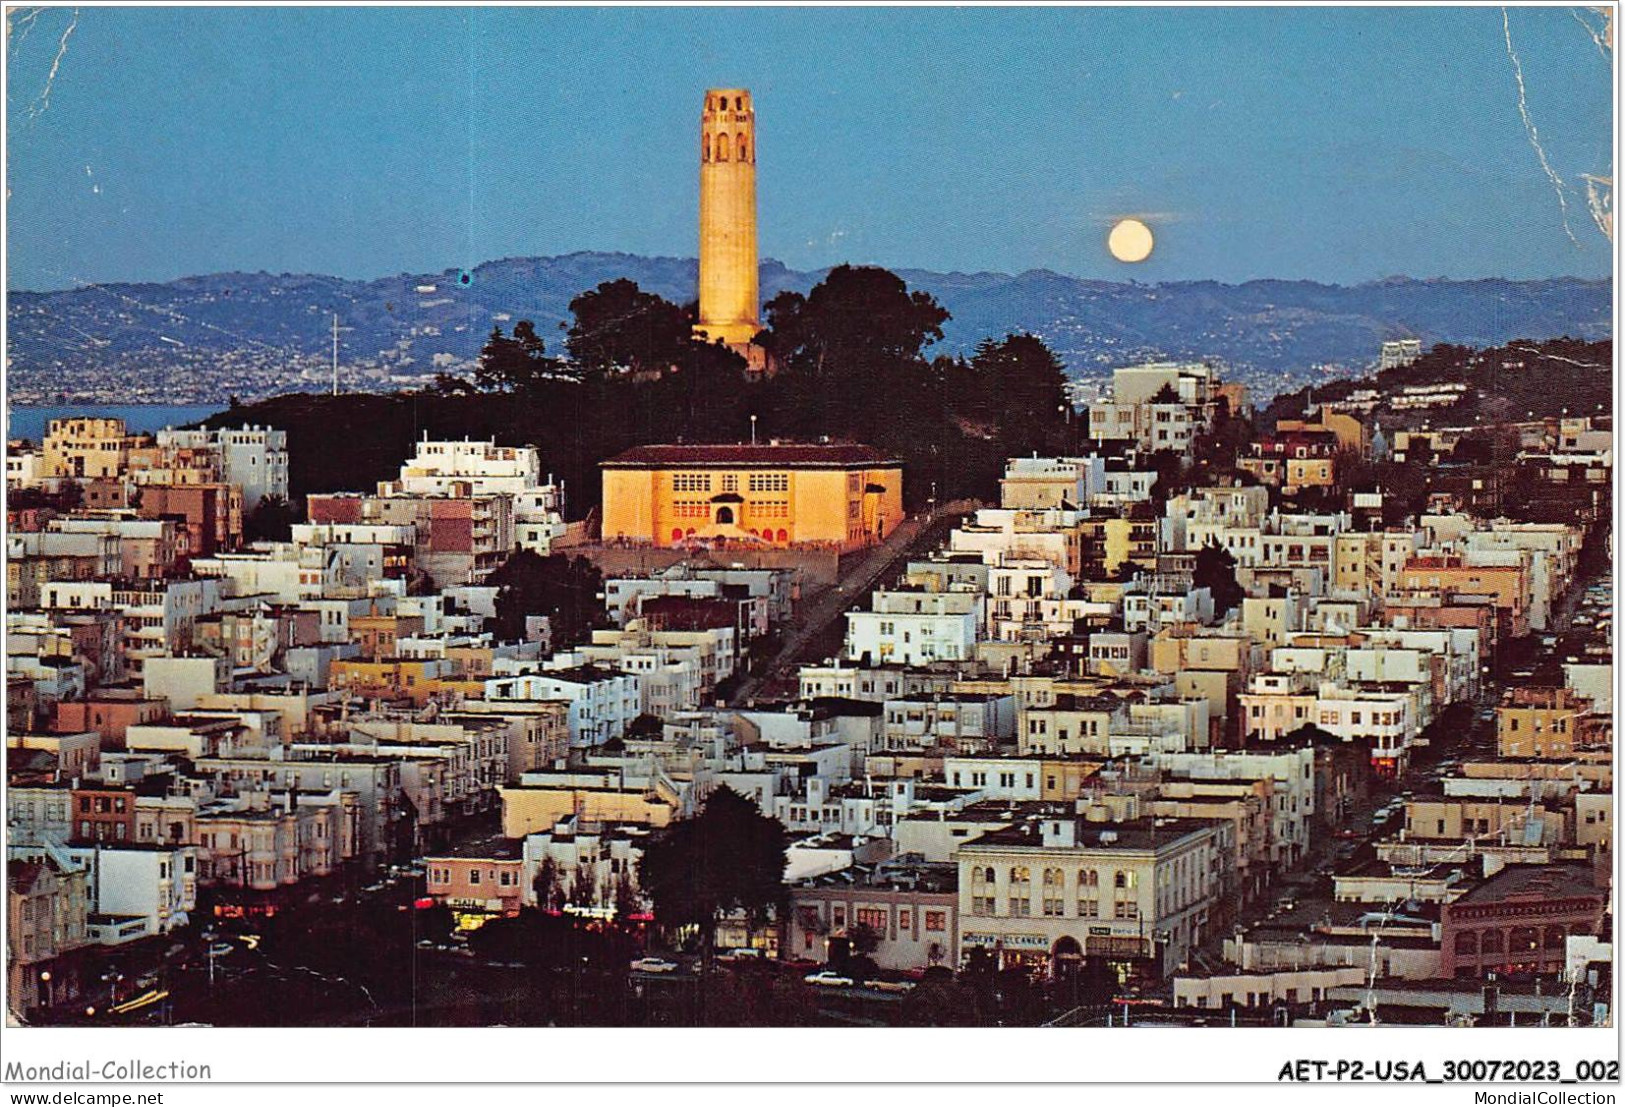 AETP2-USA-0091 - Majectic Coit Tower Shines Brightly Over SAN FRANCISCO On A Moonlight - San Francisco